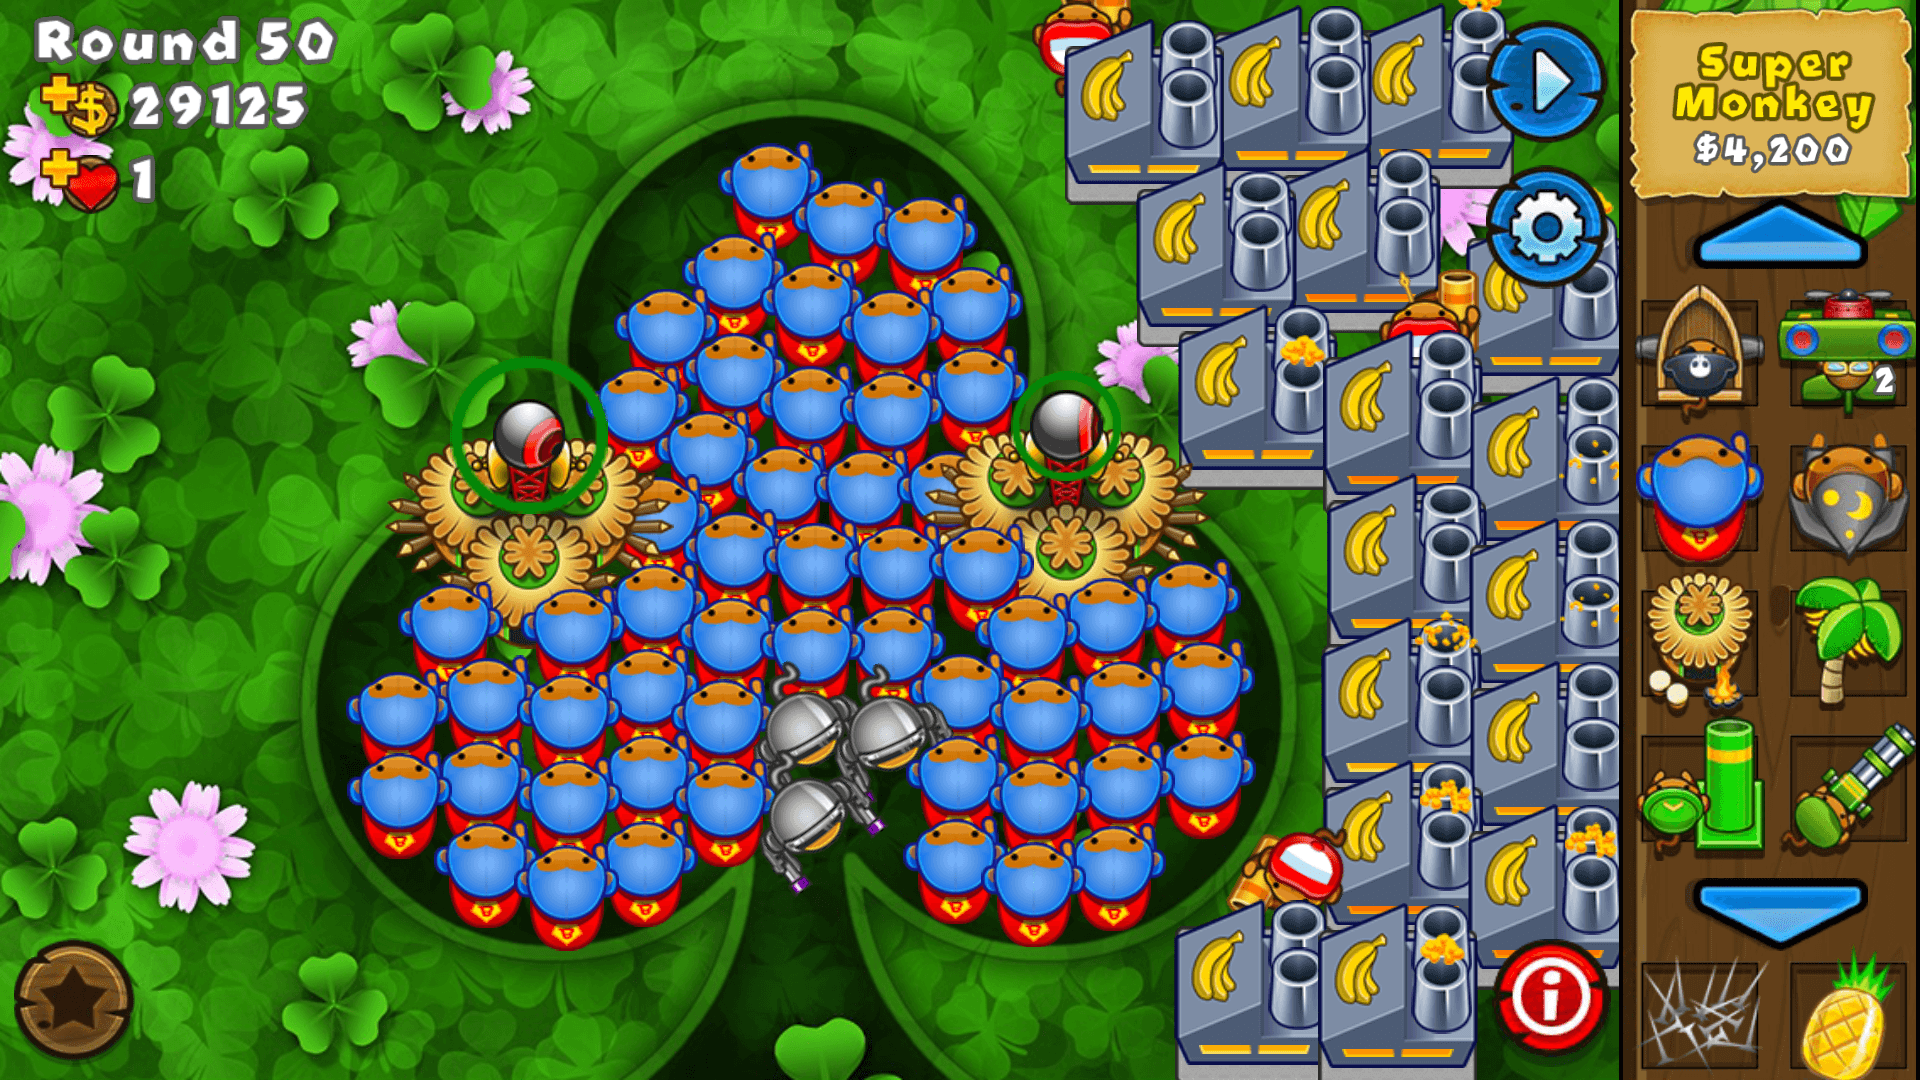 bloons tower defense 5 highest round